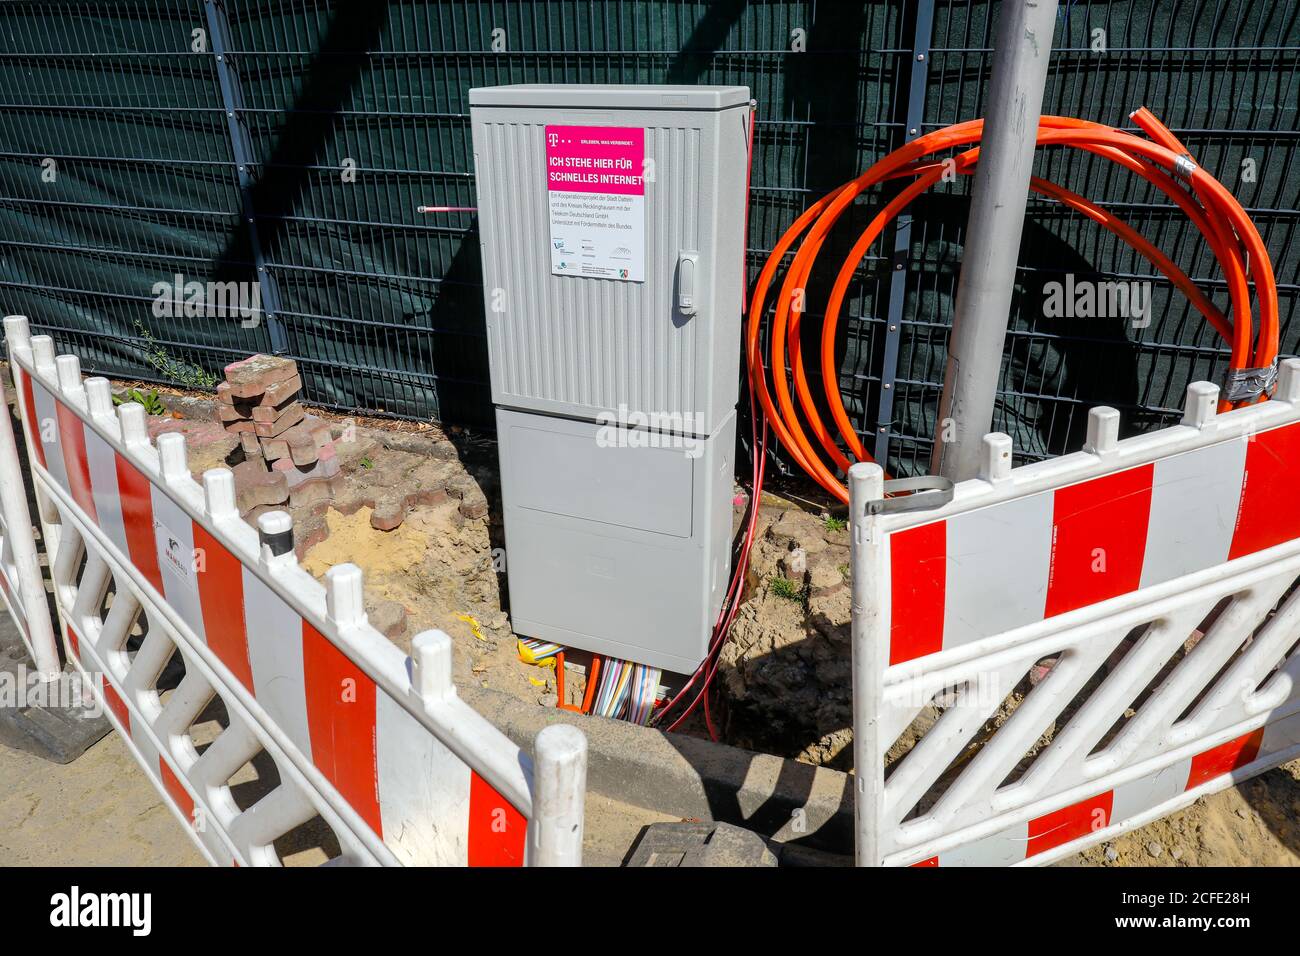 Telekom distribution box for fast internet, construction site DSL cable connection for households, Datteln, North Rhine-Westphalia, Germany Stock Photo